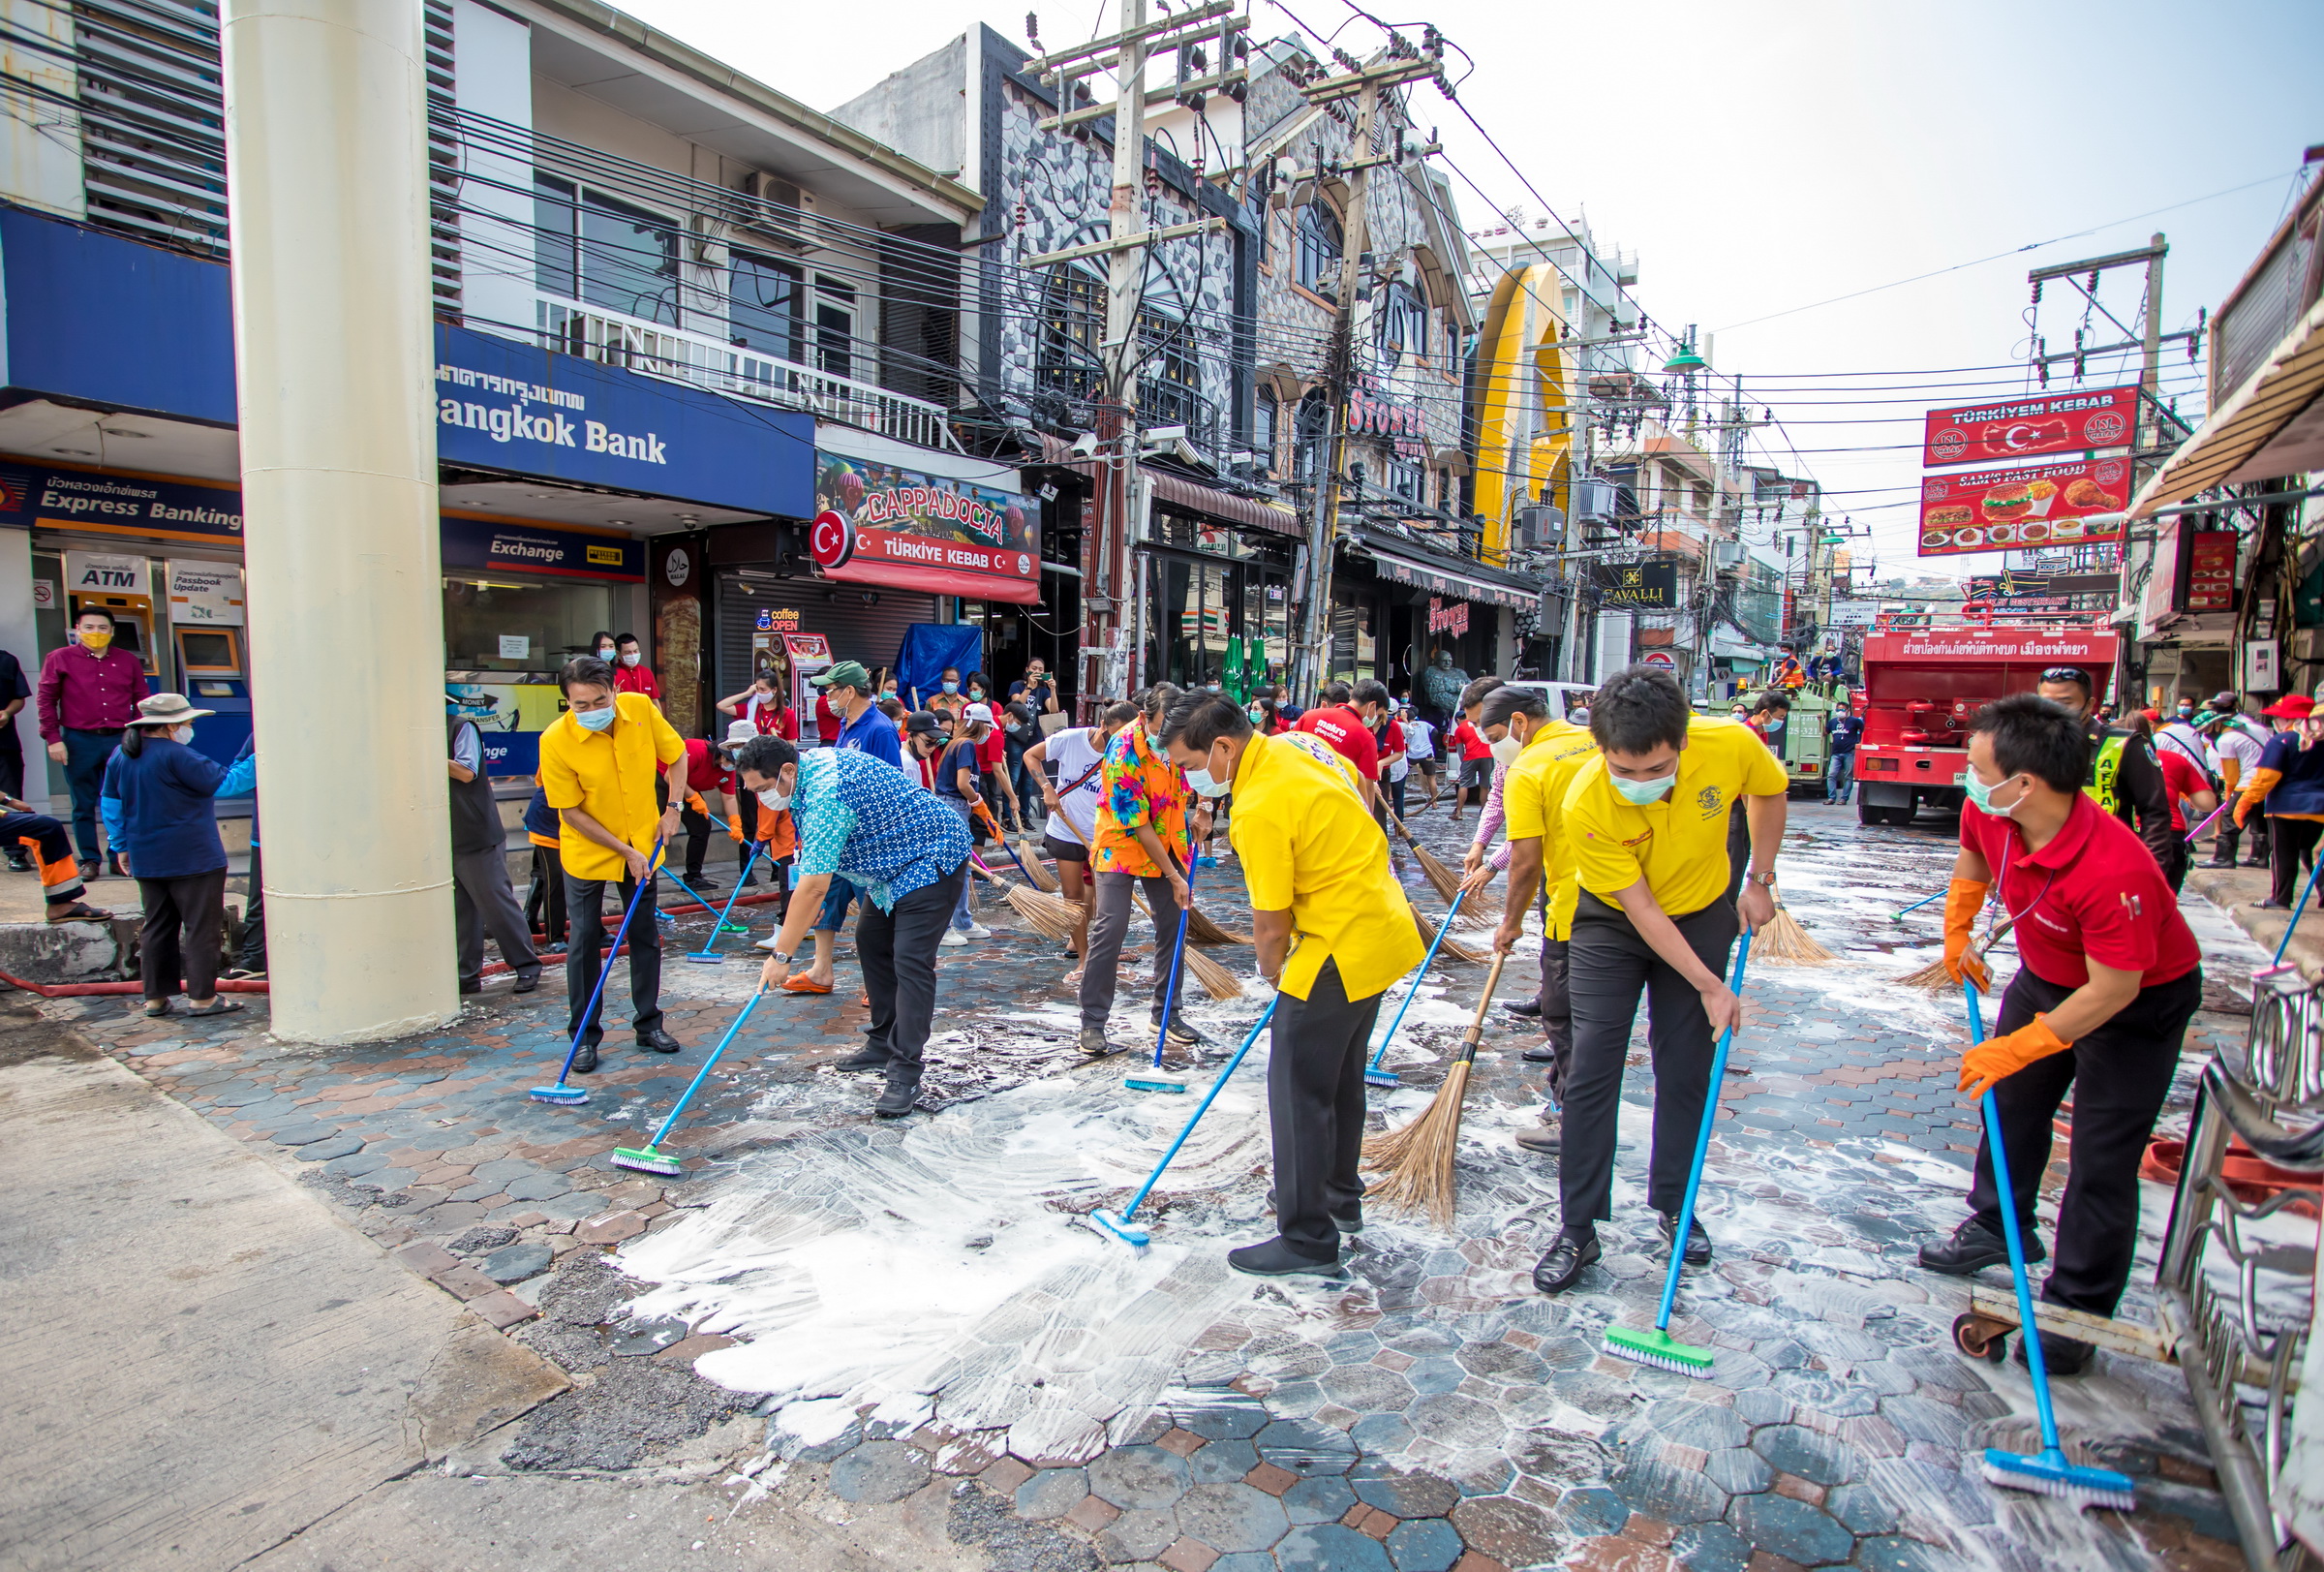 Officials participate in a “Big Cleaning Day” event at Pattaya's Walking Street on Jan. 28, 2021.